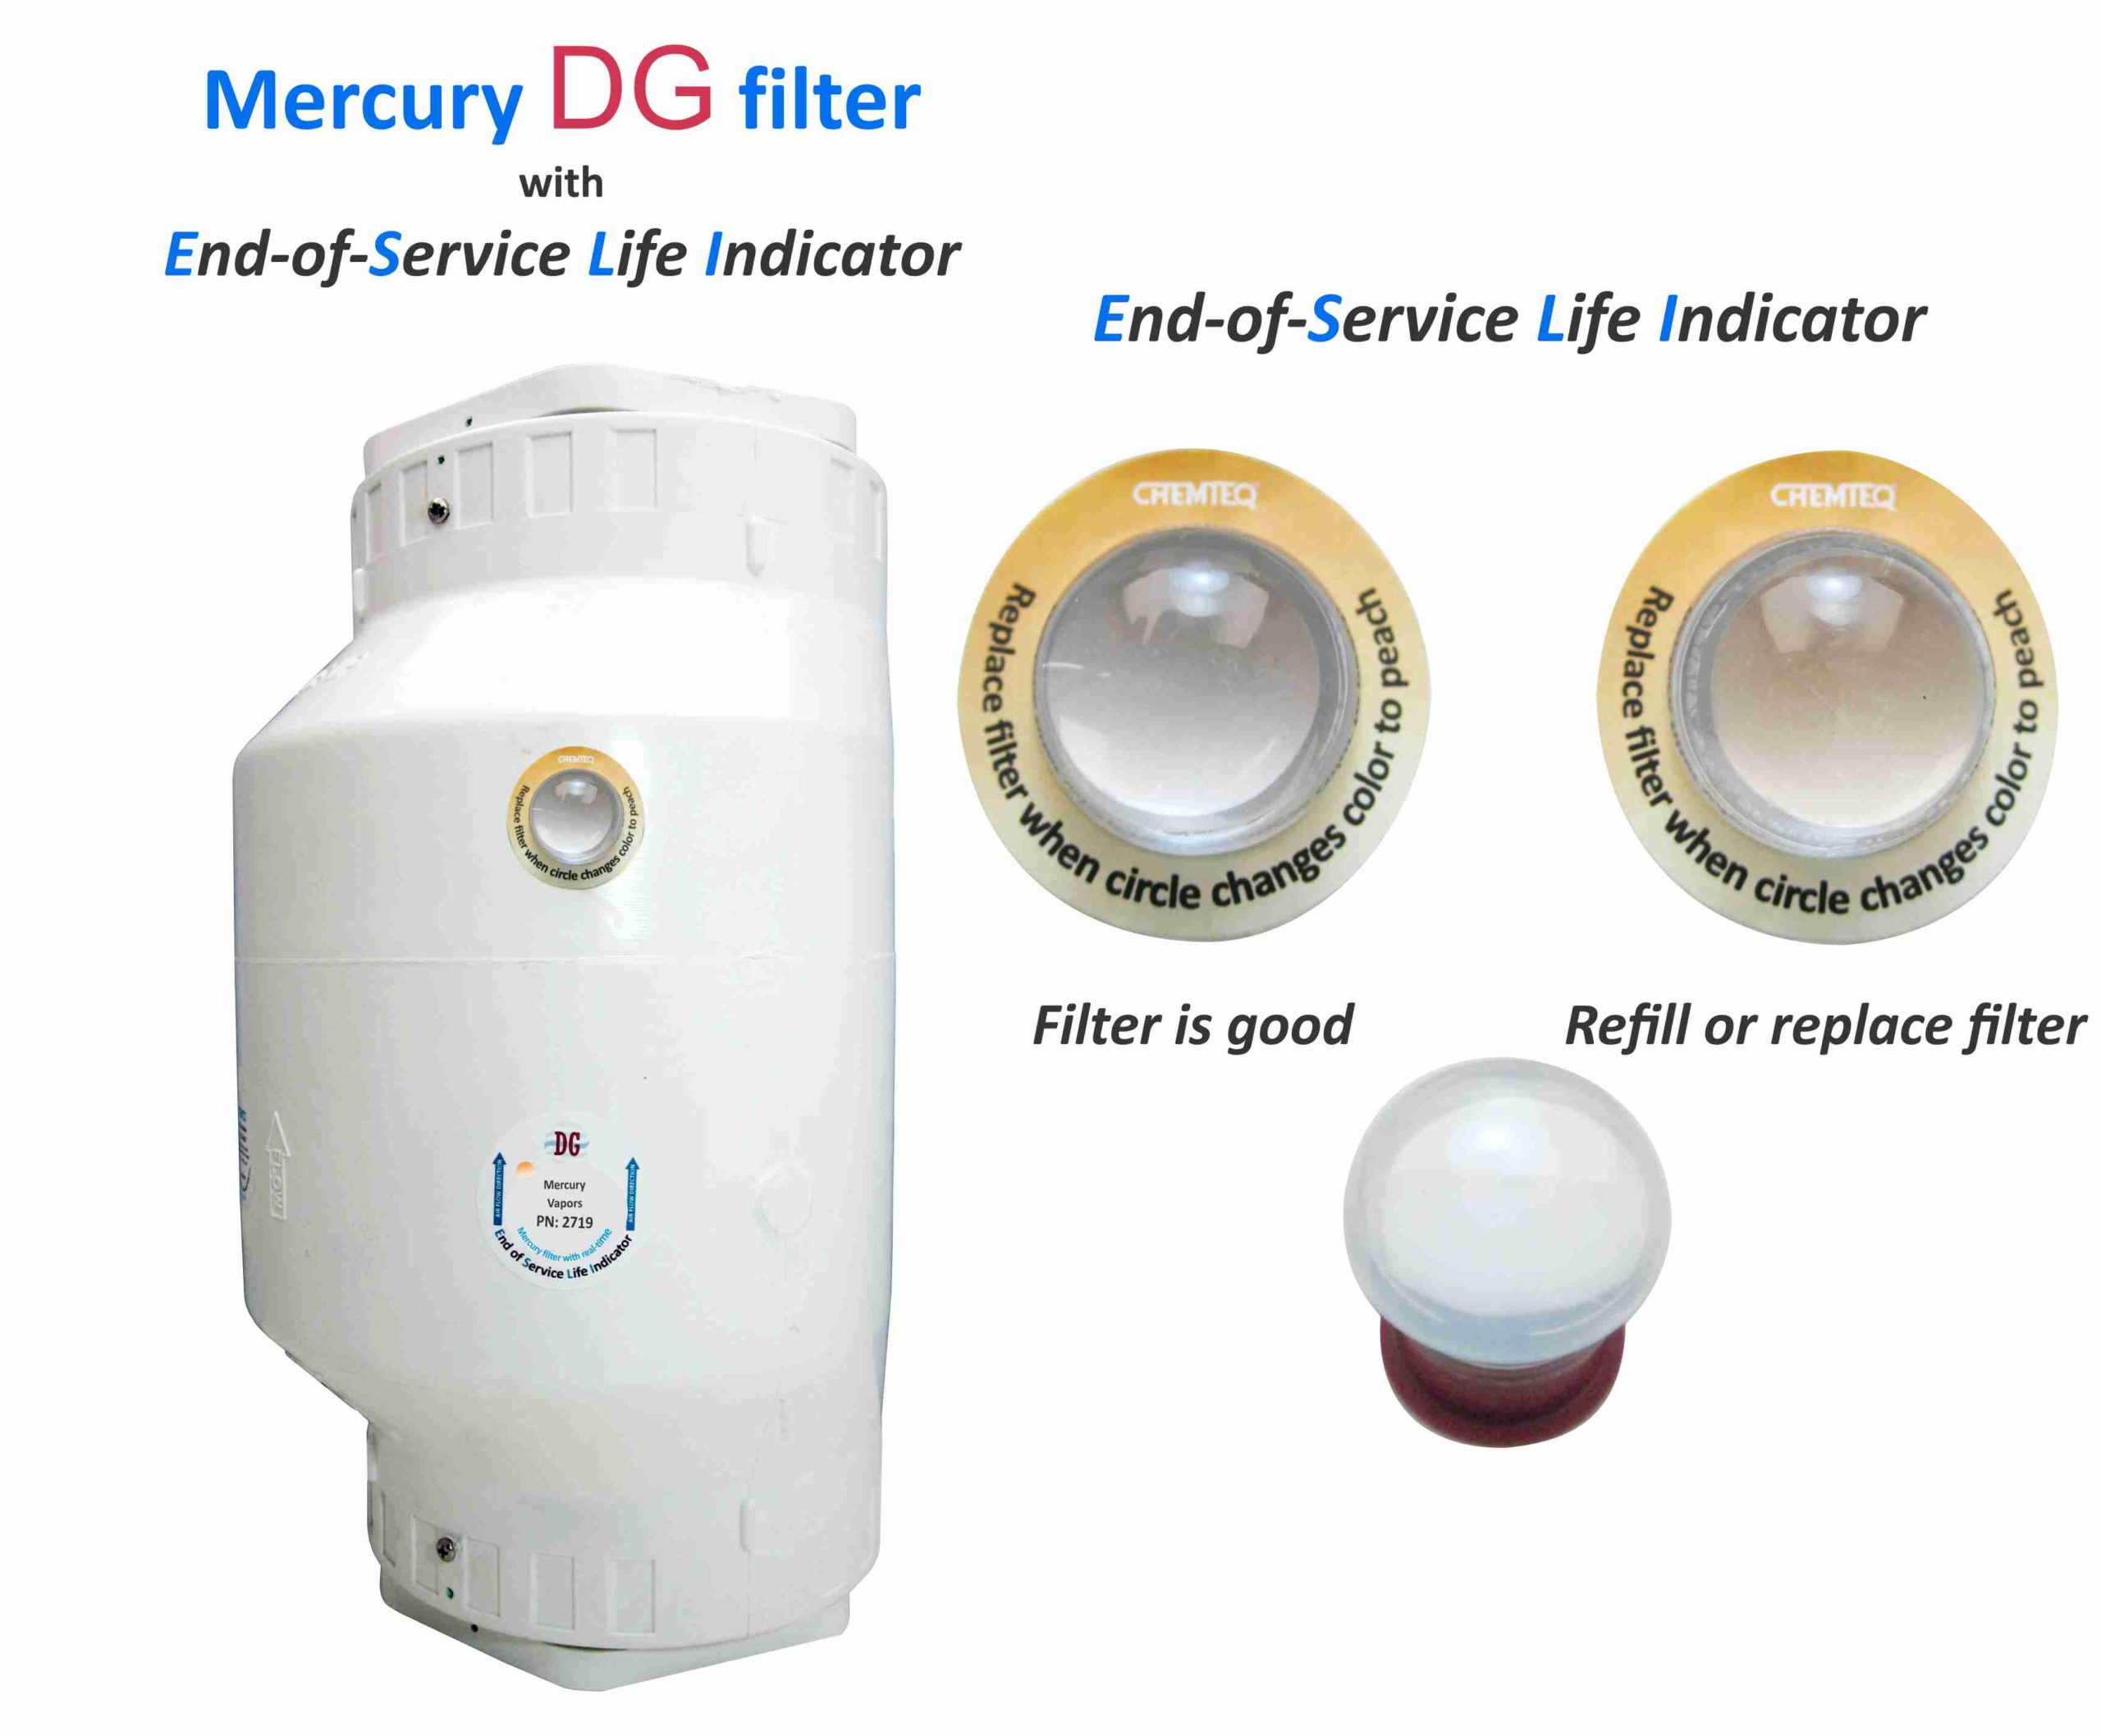 Mercury DG FILTER-ESLI 2719. Filter with end of service life indicator. Suitable for chemical processes and reactor vents.